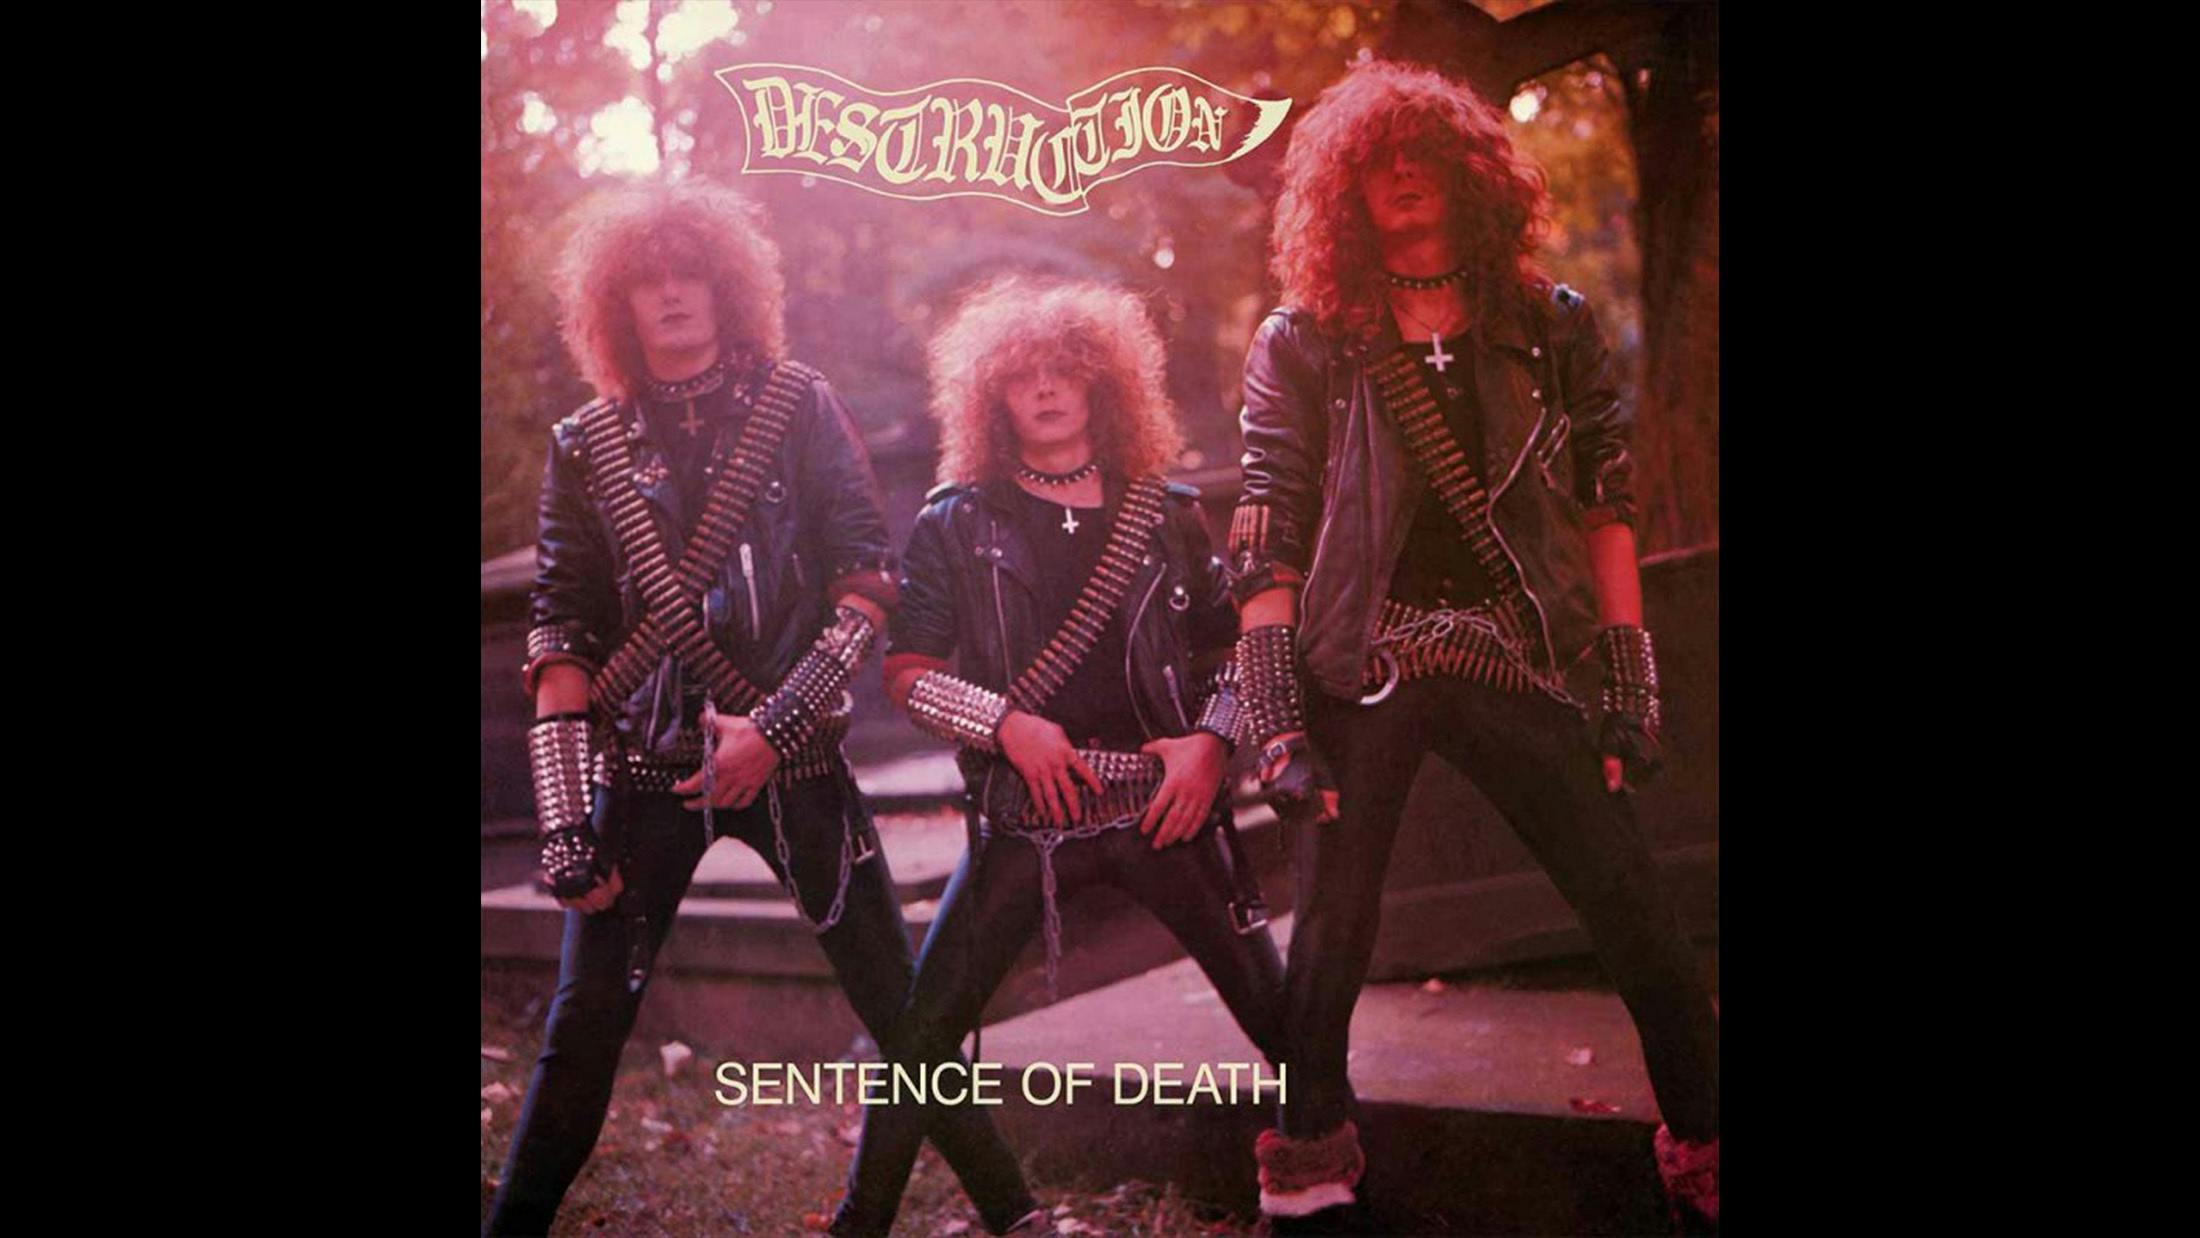 The legendary Sentence Of Death cover. Kind of funny that the label made it in PINK and the album is now a thrash classic. Maybe not really the best colour for an old school metal record?